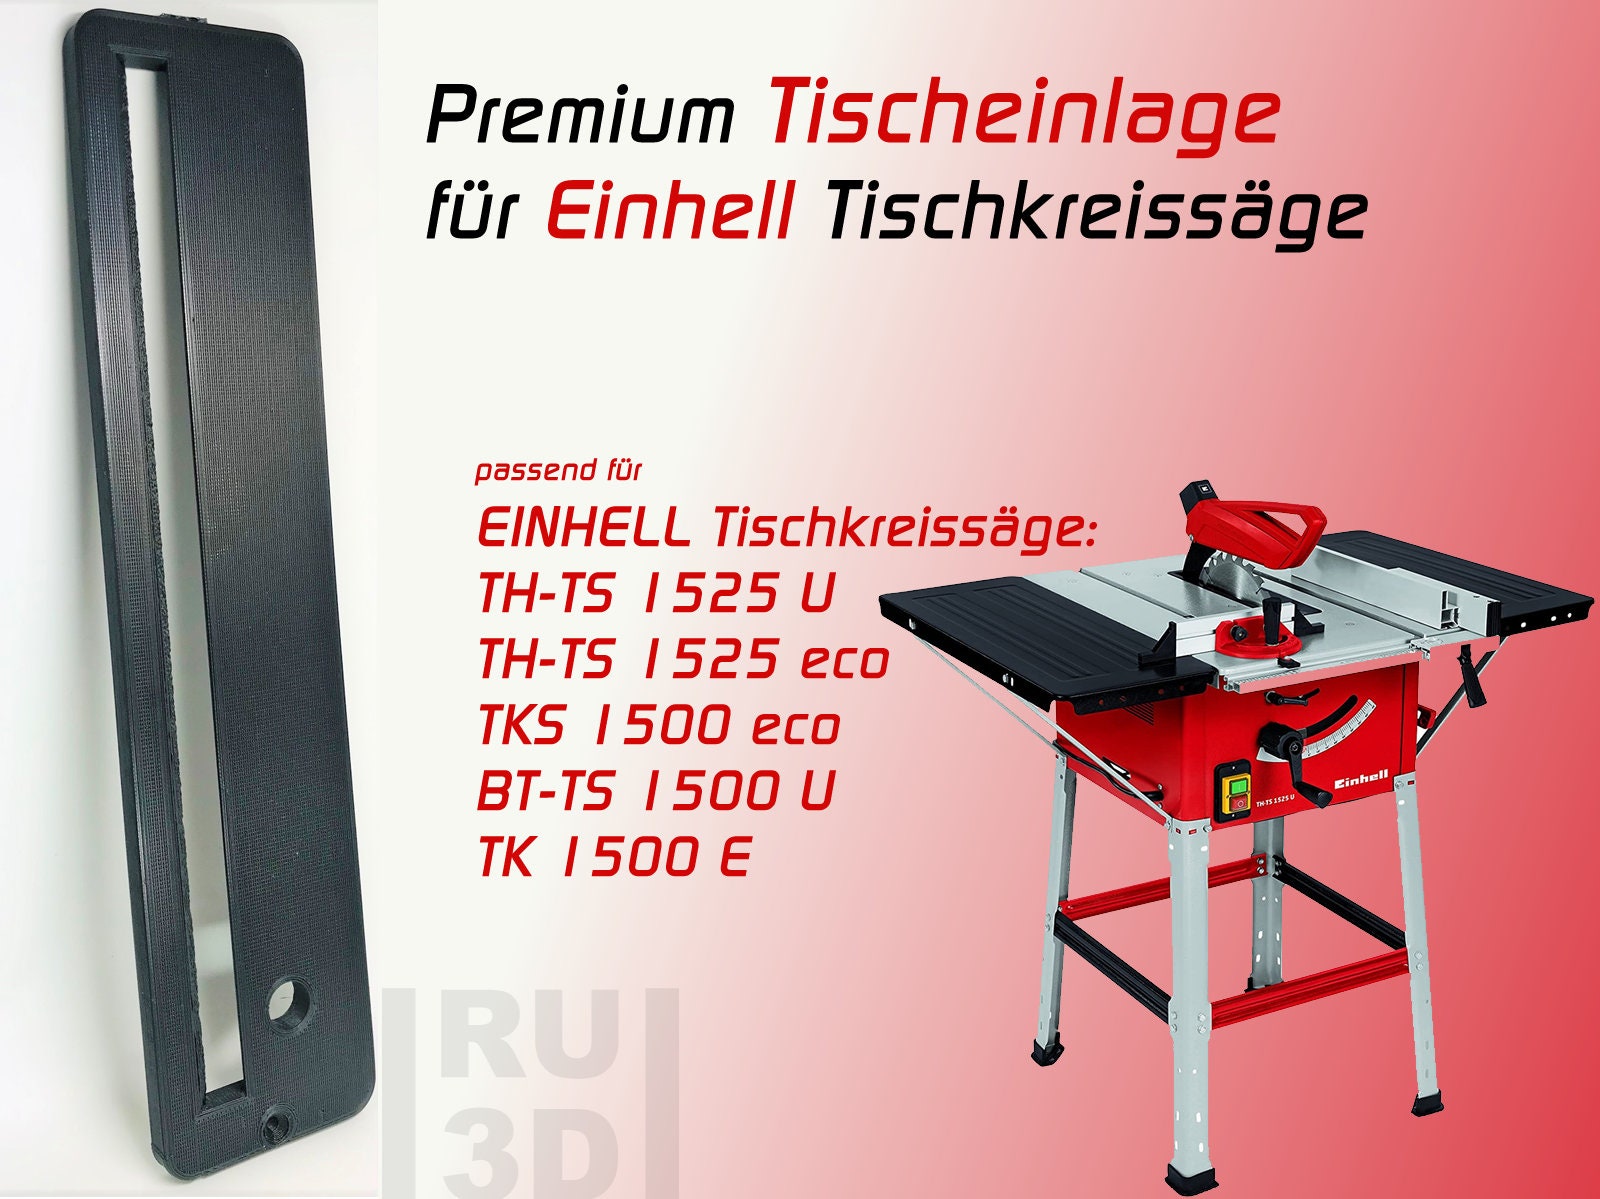 licht voorkant Narabar Reinforced Table Insert for EINHELL TS 1525 and 1500 Circular - Etsy